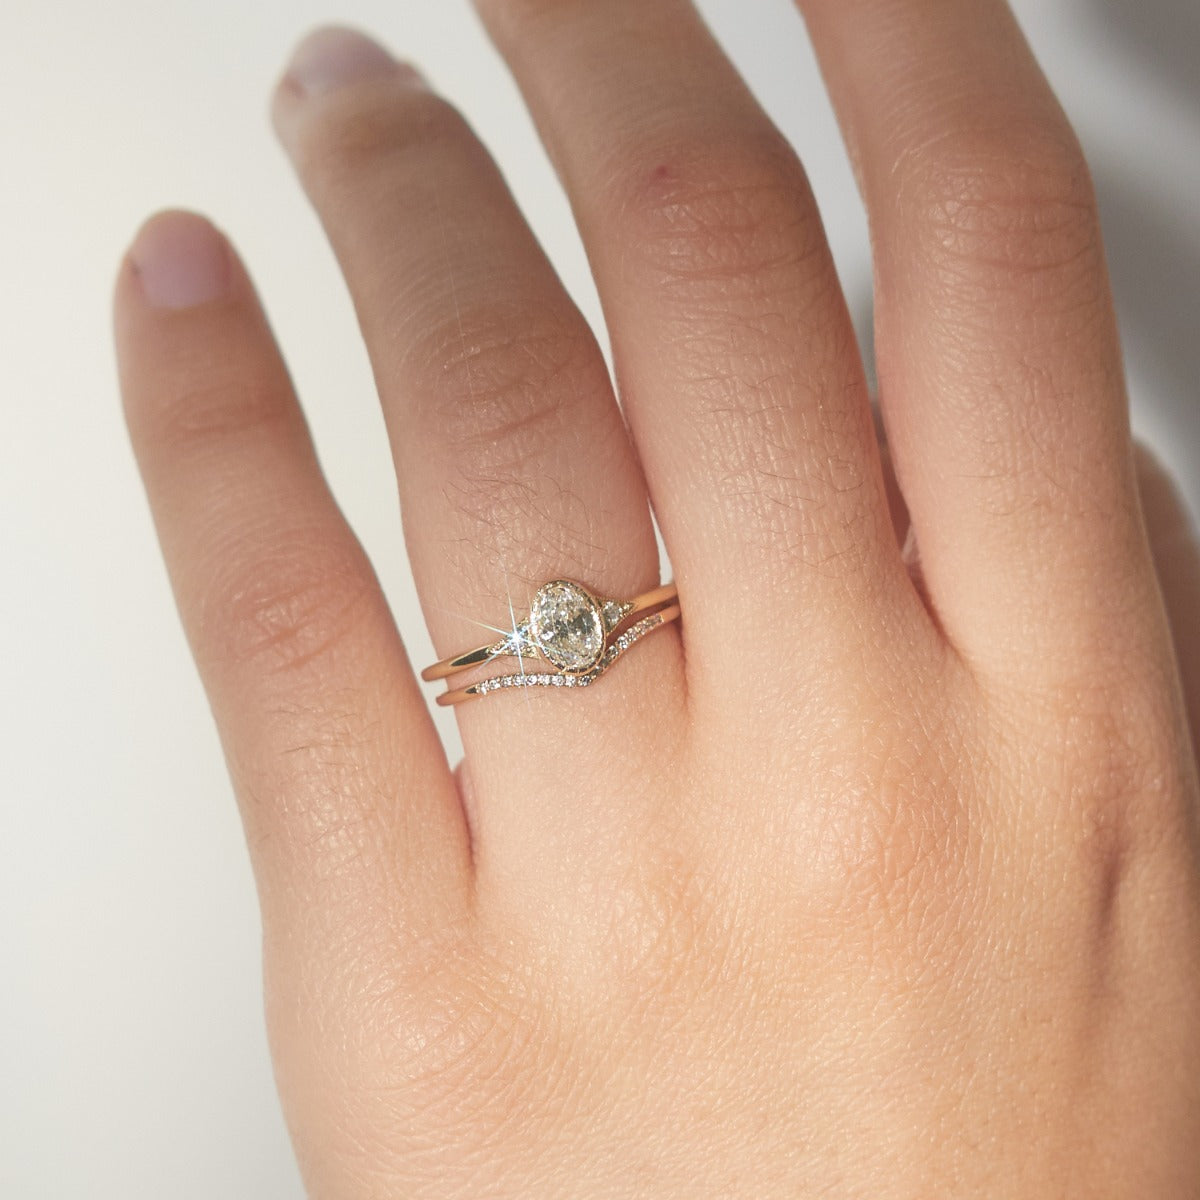 Jennie Kwon Exemplar Solitaire Ring